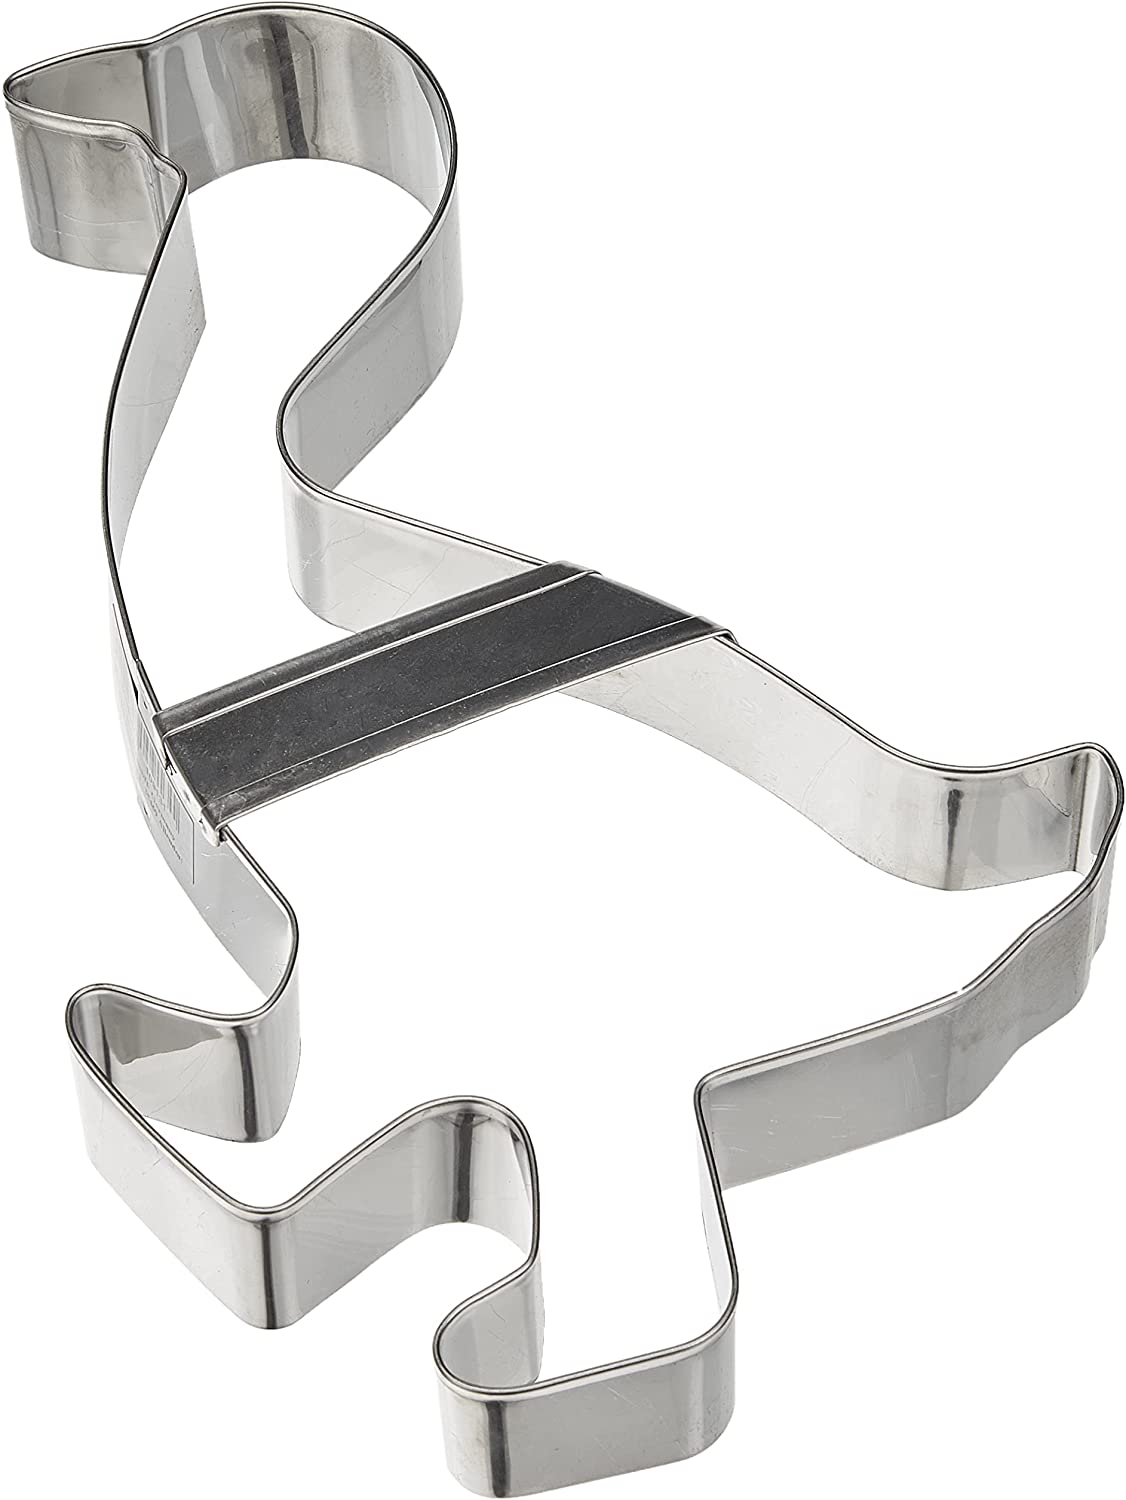 Staedter Goose Biscuit Cutter, Stainless Steel, Silver, 17,5 cm